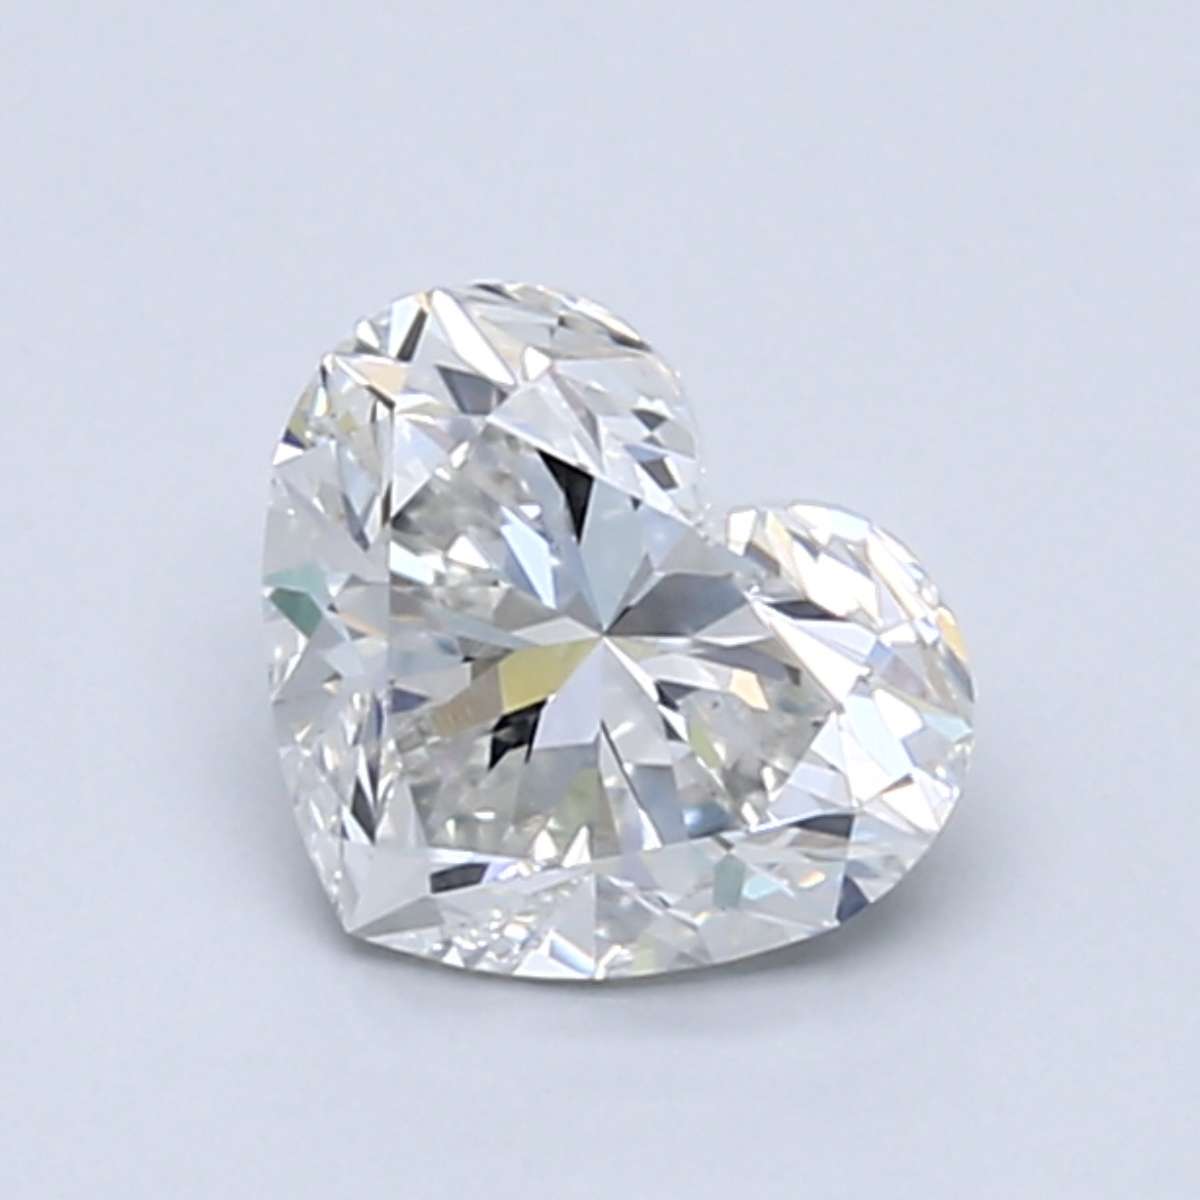 Heart 1.03 Carat G Color VS2 Clarity For Sale